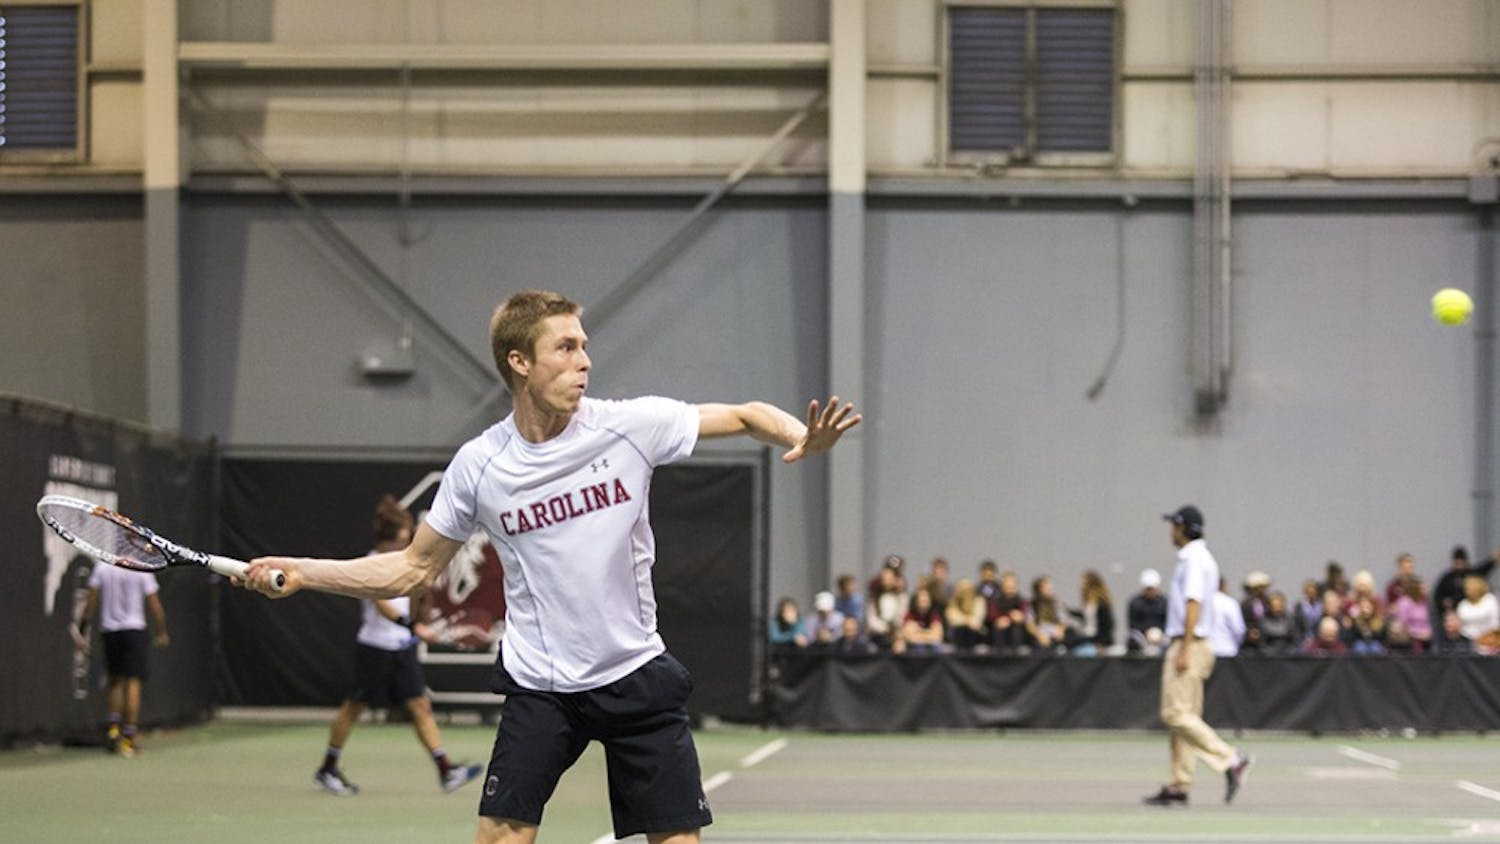 The South Carolina men's tennis team closed out the season with a 13-14 record heading into the SEC Tournament.